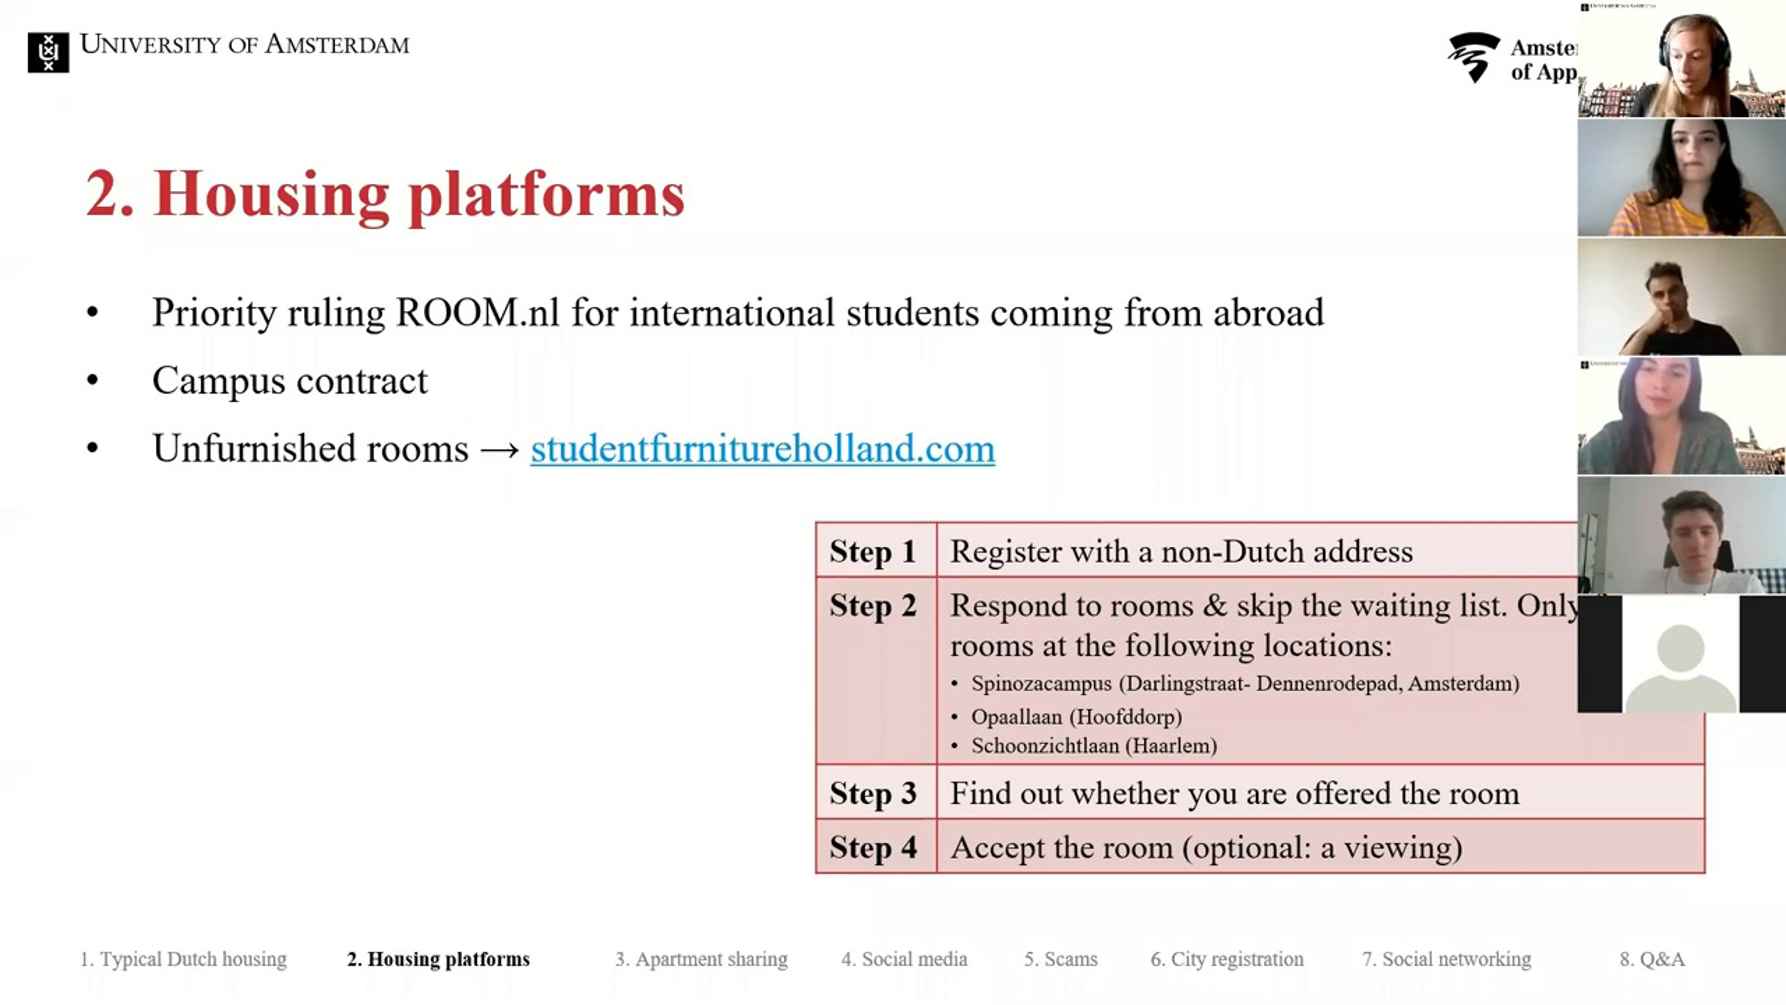 Watch our webinar on how to find accommodation as a student in Amsterdam